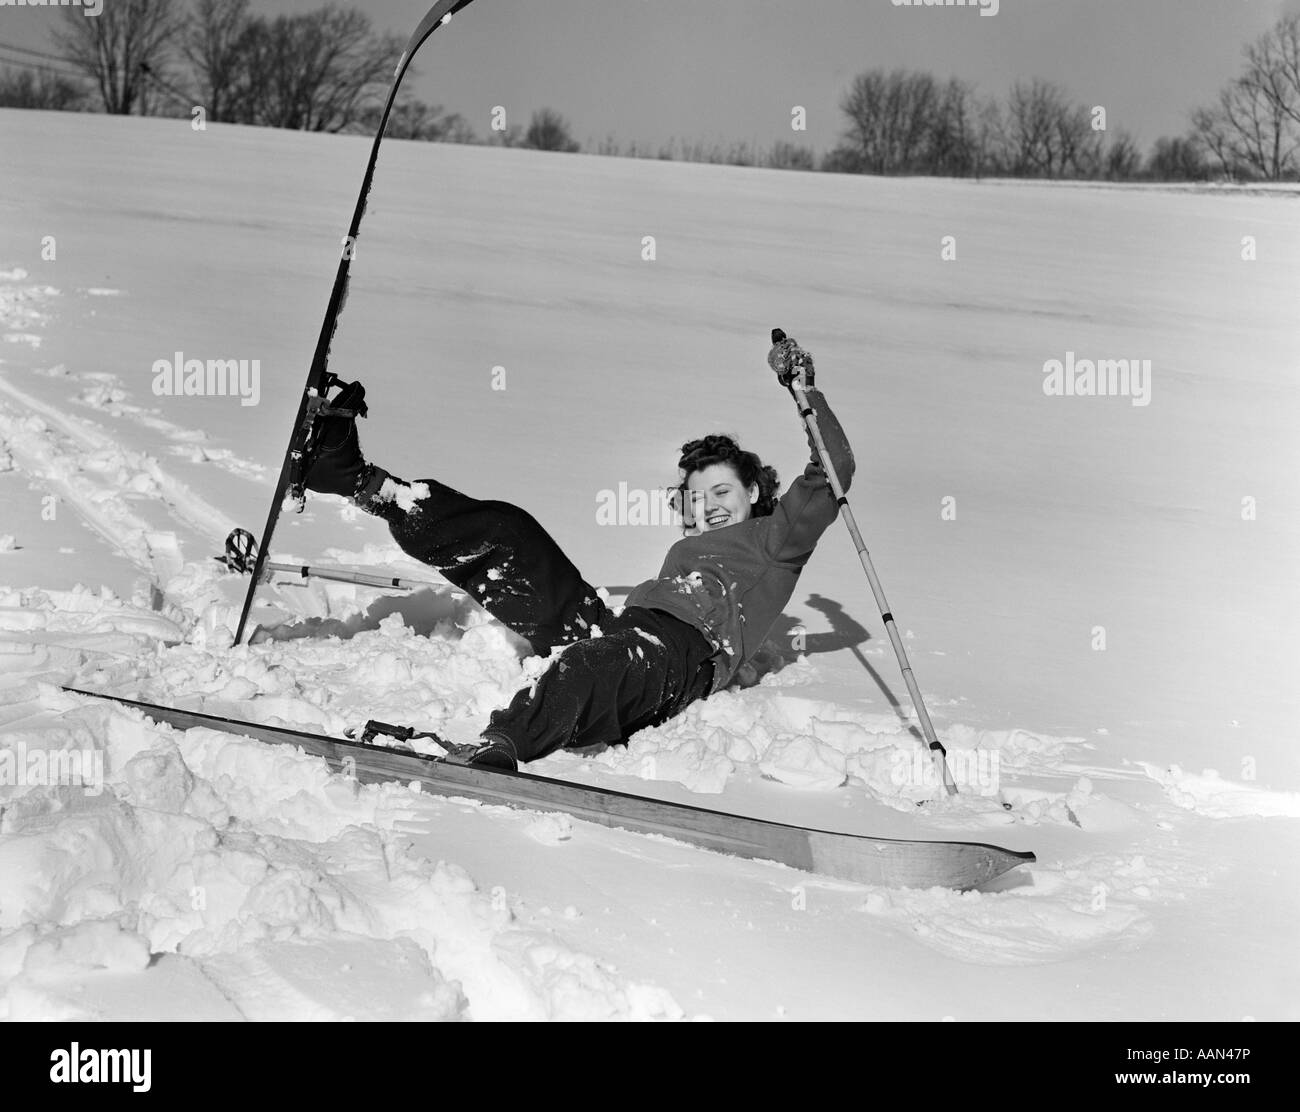 1940s 1930s WOMAN FALLING IN SNOW ON SKIS LAUGHING Stock Photo